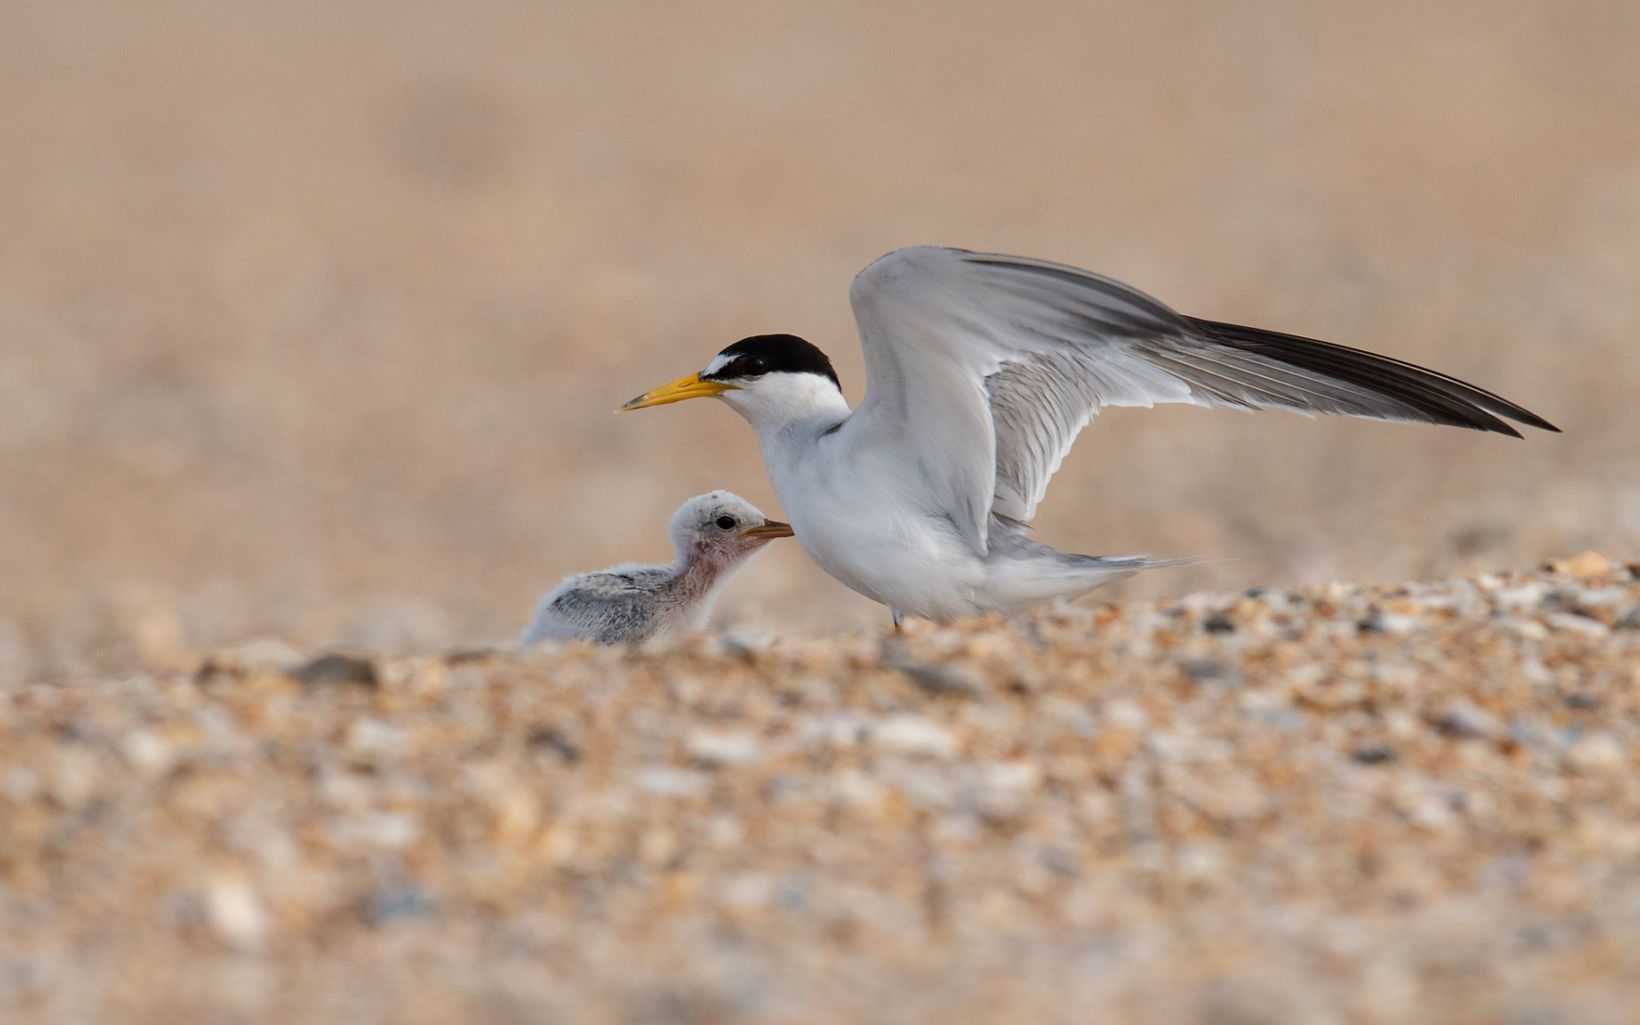 Least tern shelters chick Least terns build their nests, called scrapes, in depressions in the sand on the beach at the Meadows.  © Shutterstock: Harry Collins